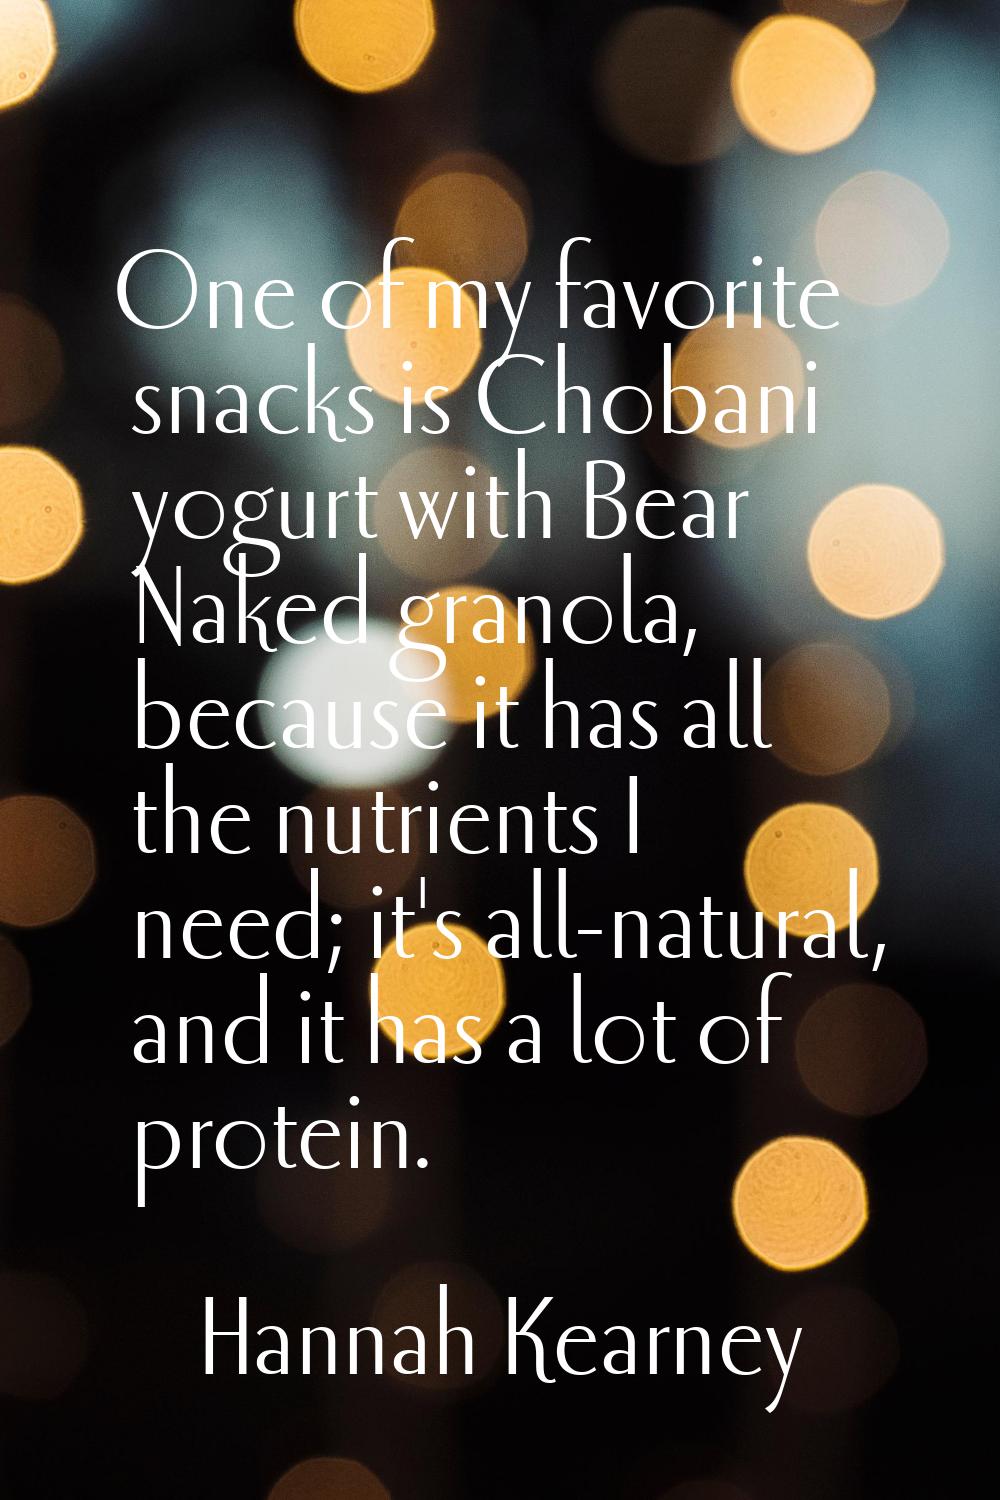 One of my favorite snacks is Chobani yogurt with Bear Naked granola, because it has all the nutrien